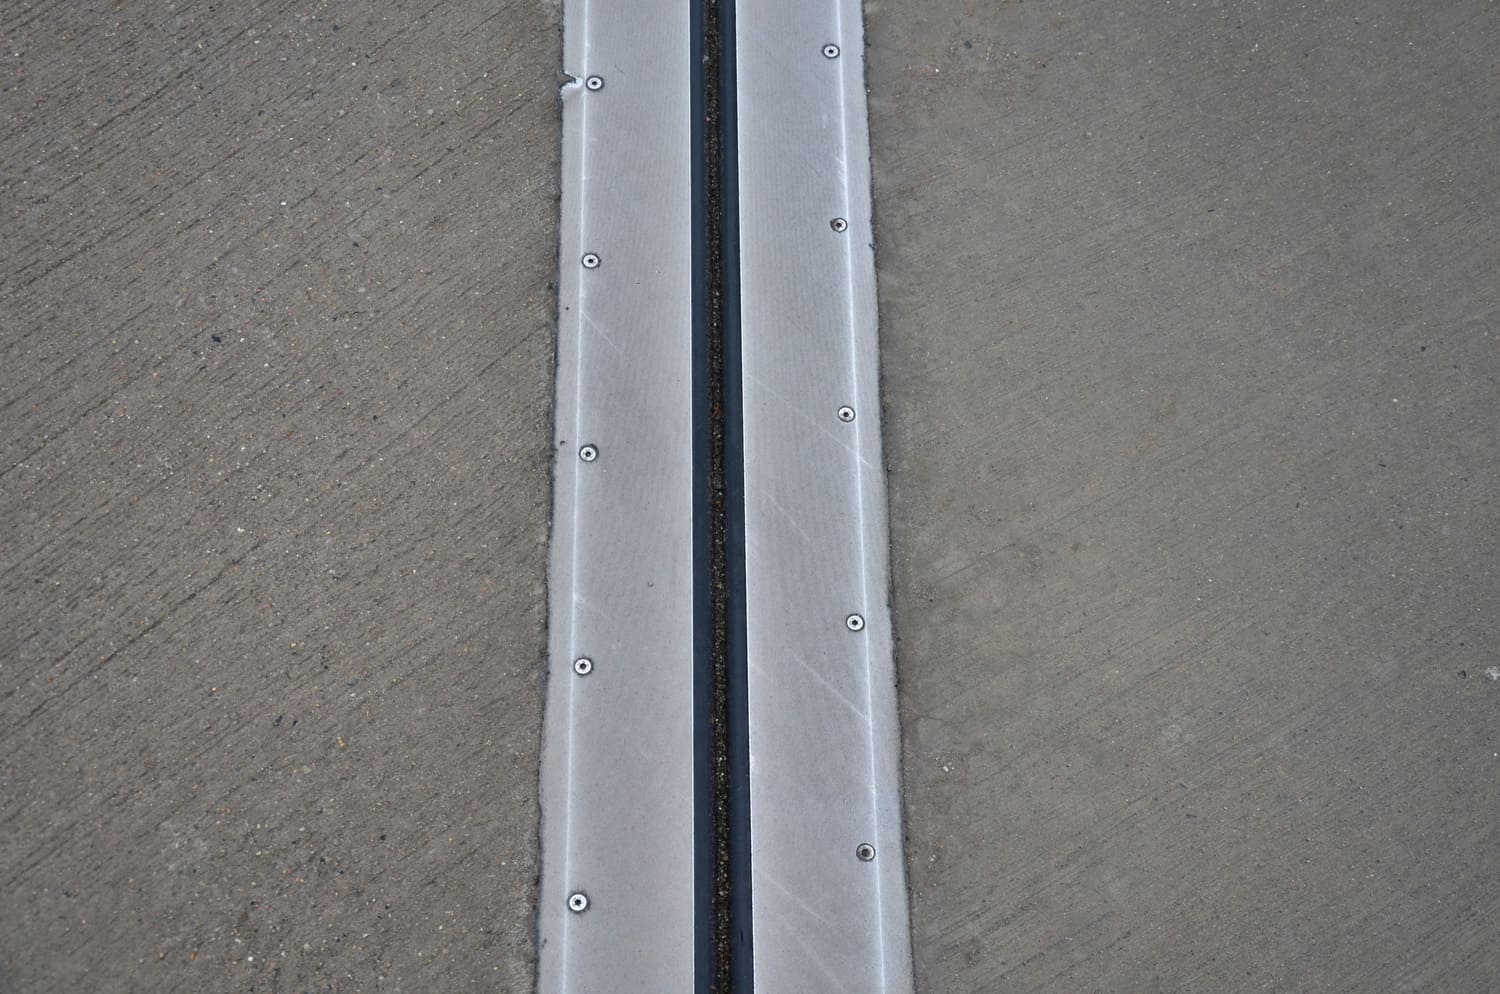 rubber joint in a metal bar, expandable, crack, extension, cord, expanse, expanding, strip, synthetic